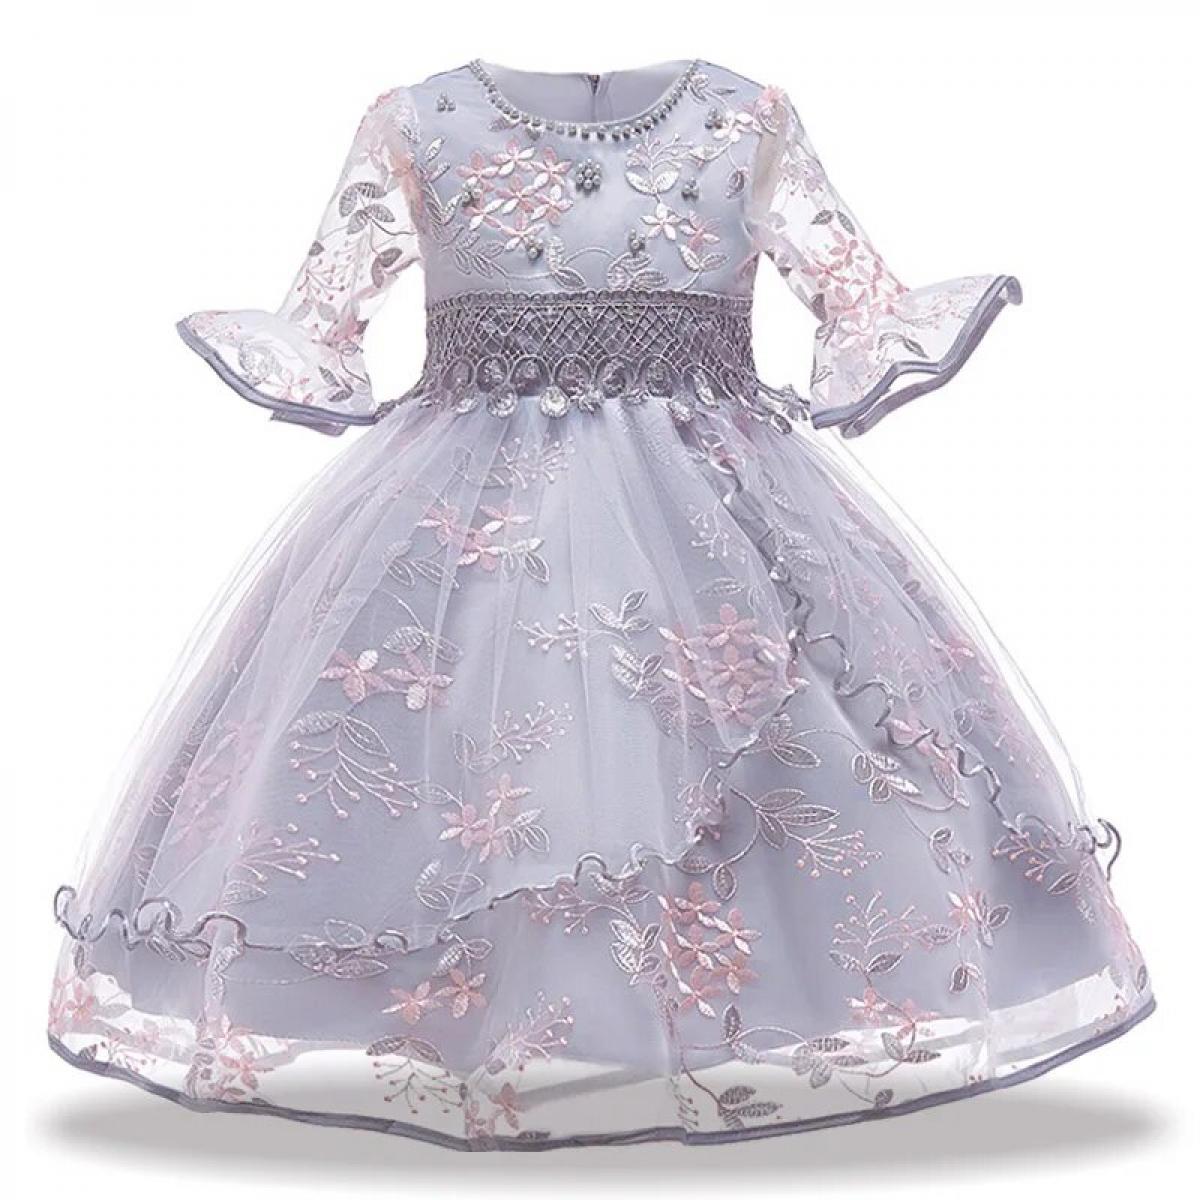 Elegant Girl Flower Embroidery Dress Kids Half Sleeve Birthday Party Clothes Child Formal Christmas Costume Pink Gray Ve